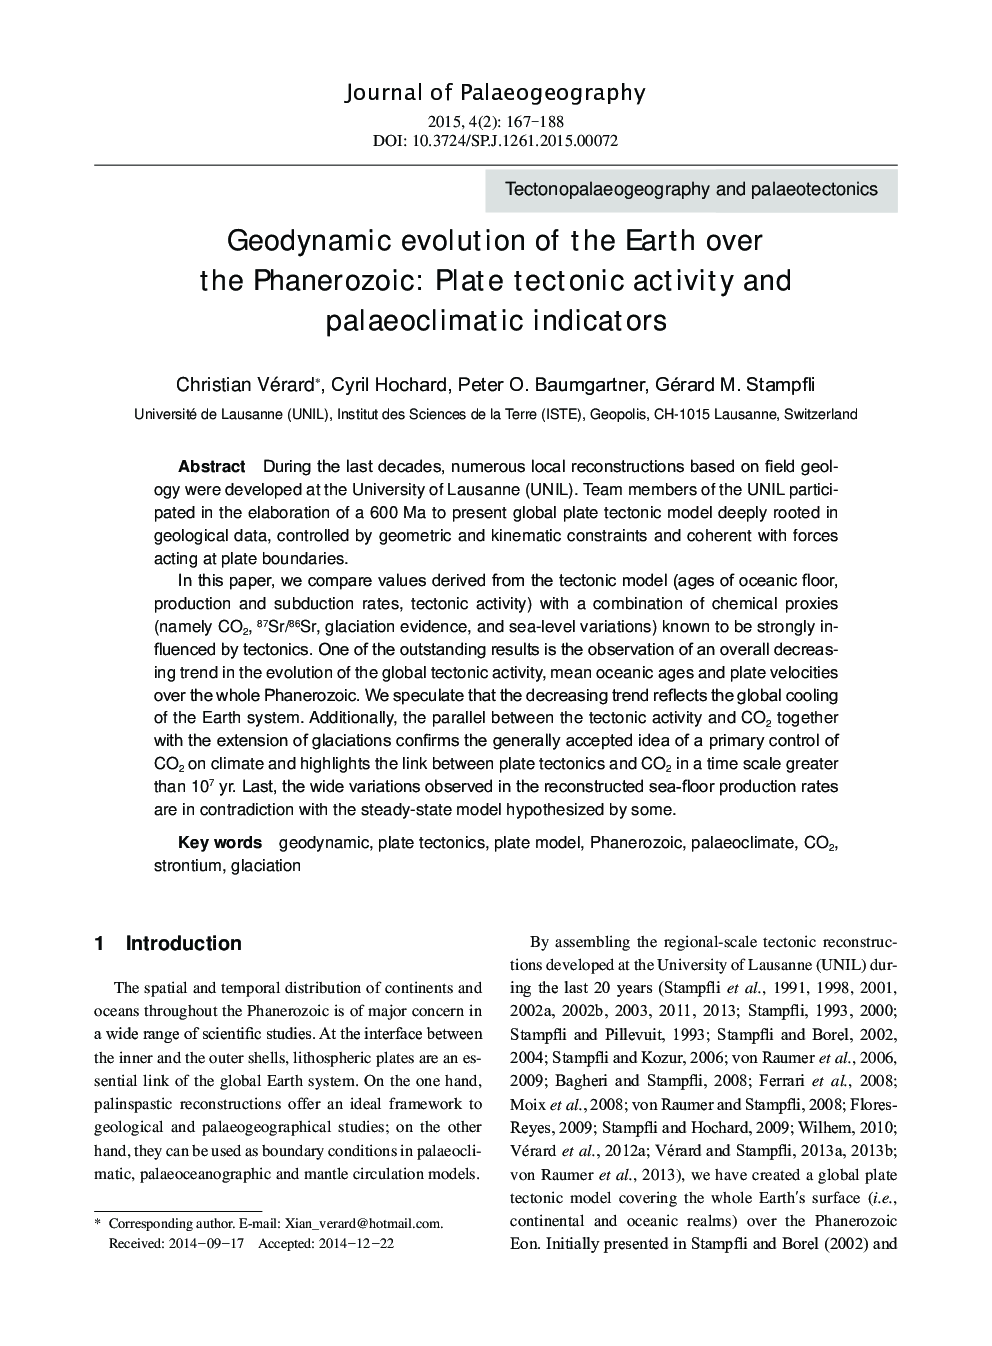 Geodynamic evolution of the Earth over the Phanerozoic: Plate tectonic activity and palaeoclimatic indicators